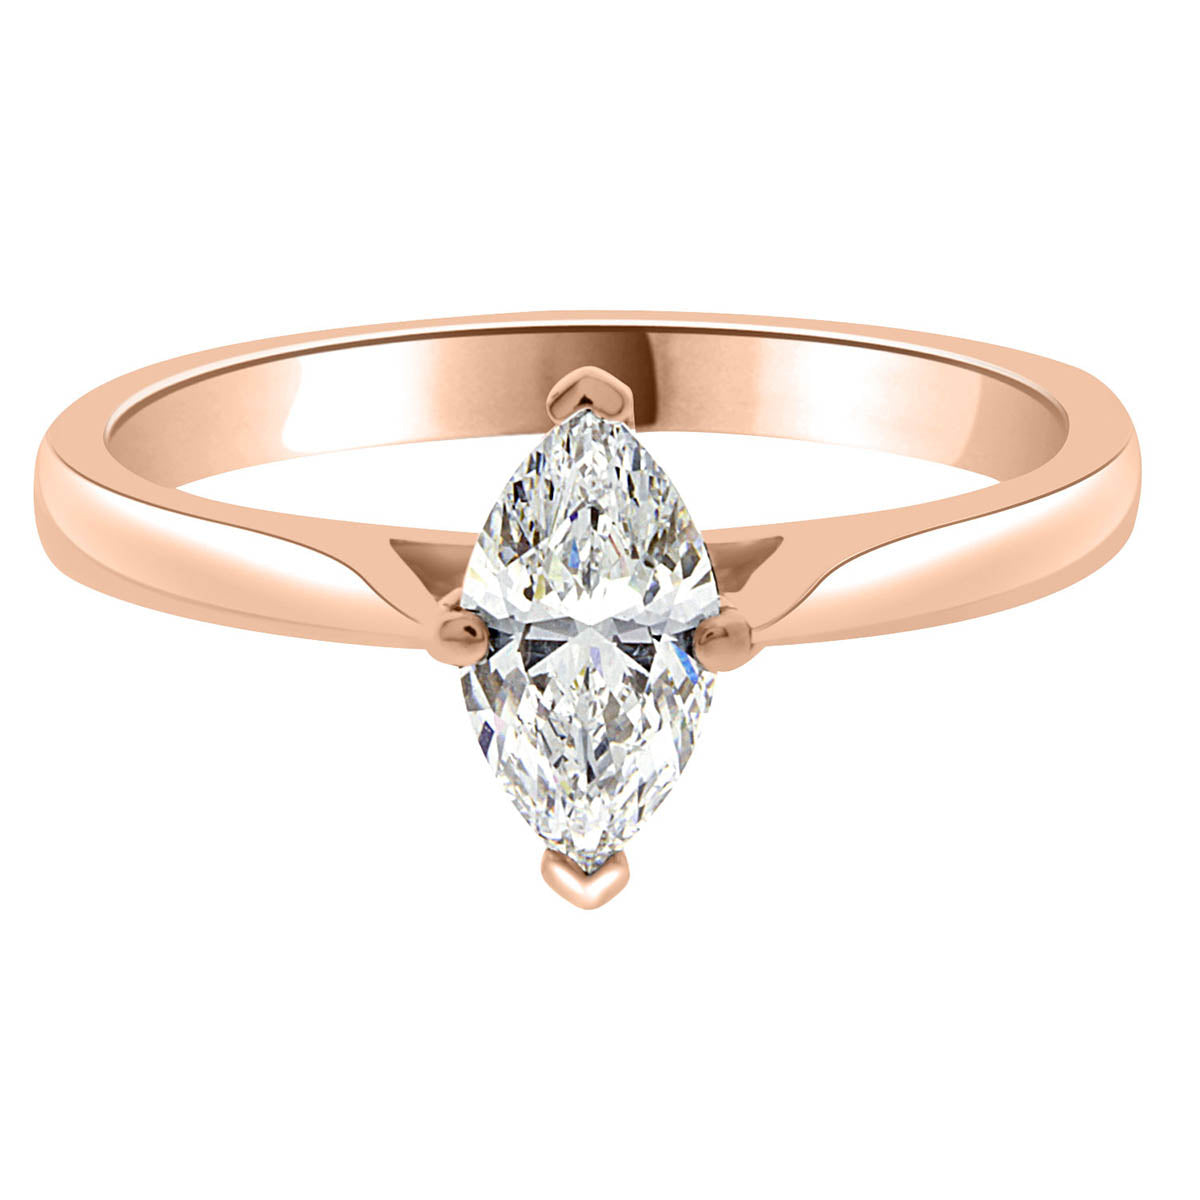 Marquise Solitaire Engagement Ring made from rose gold